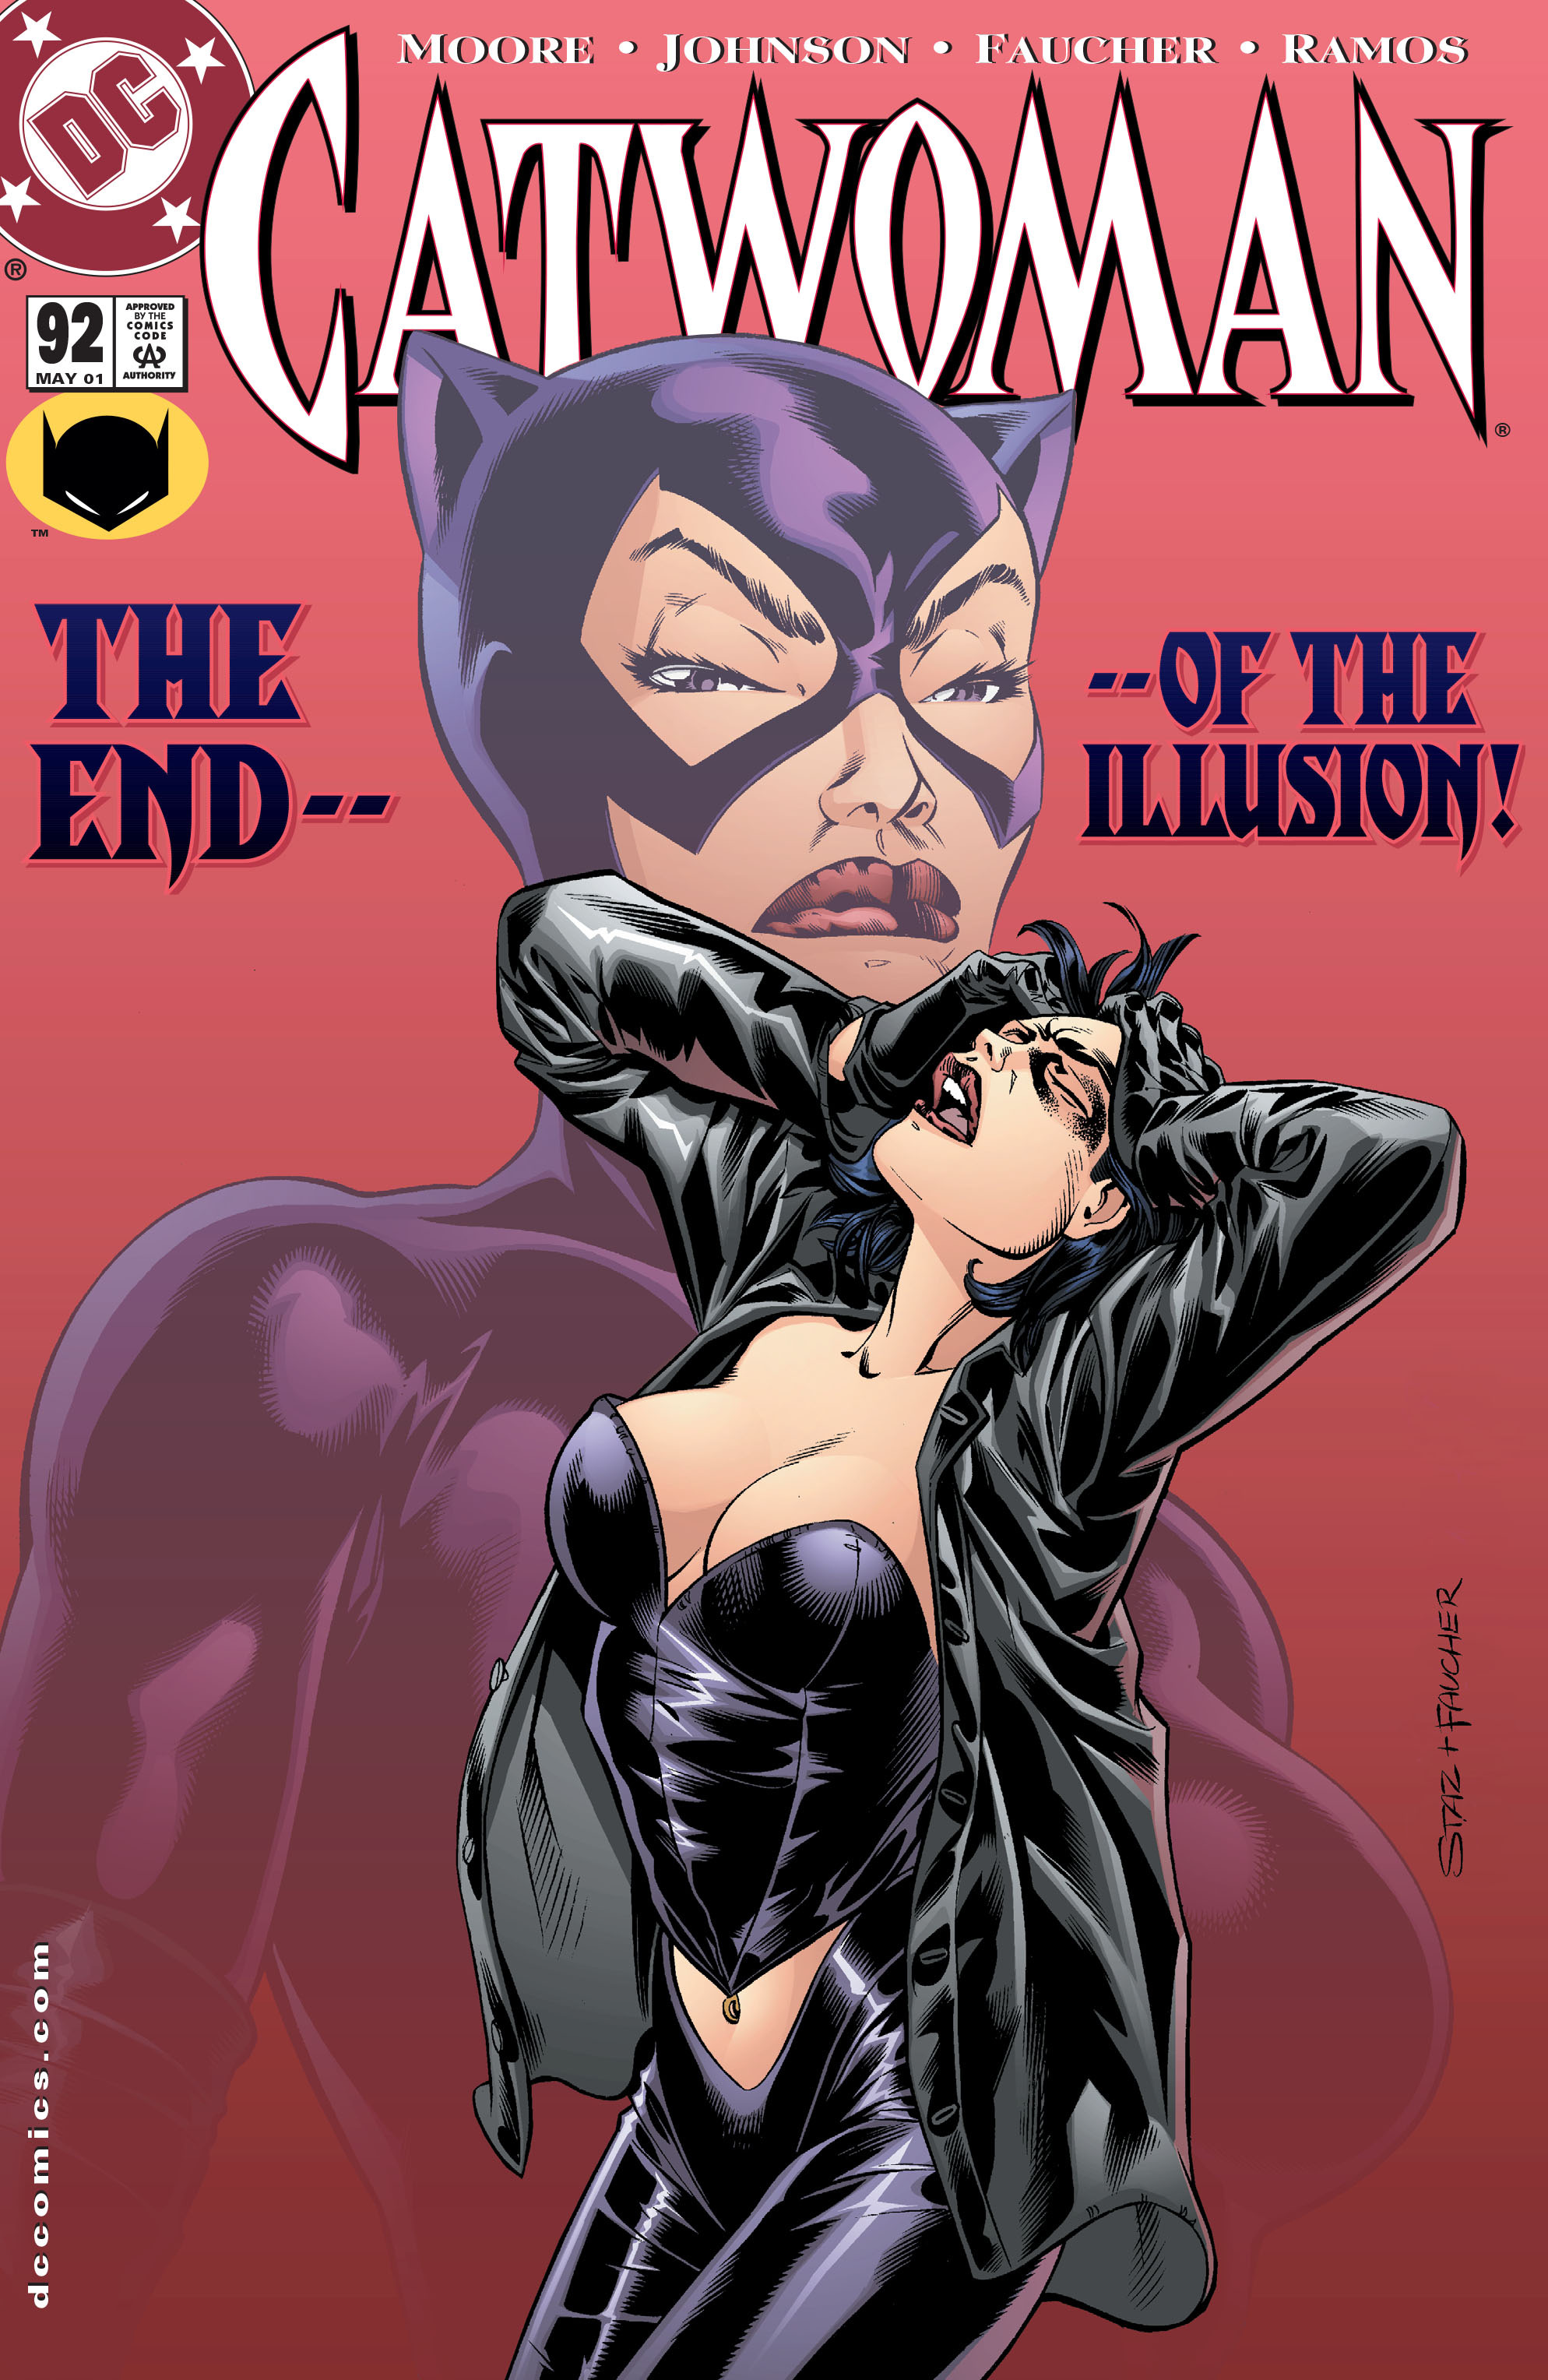 Read online Catwoman (1993) comic -  Issue #92 - 1